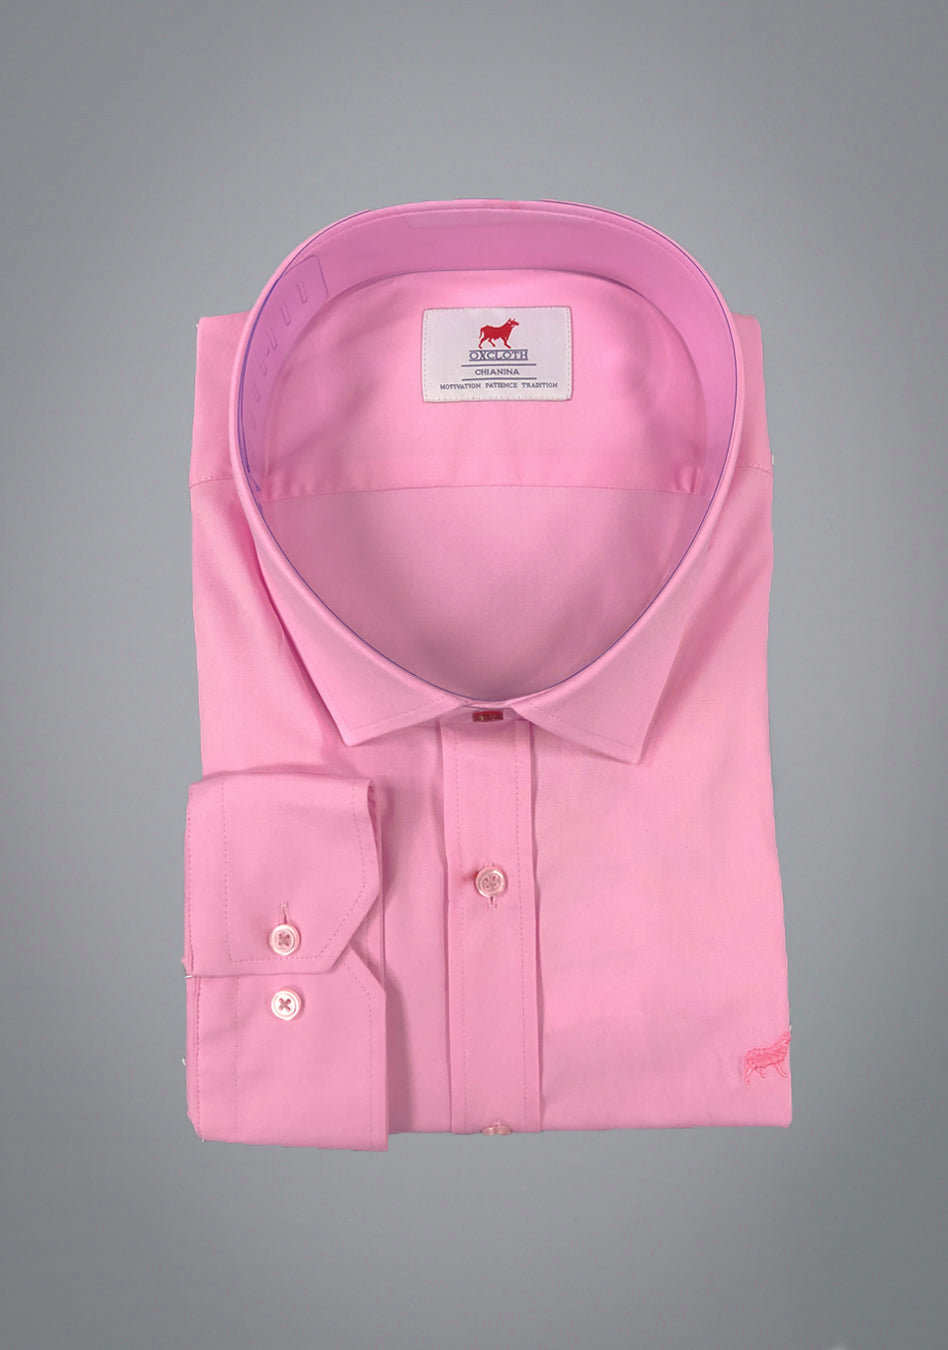 Pink muscle fit shirt on an athletically built model, showcasing the athletic fit design that enhances physique, with stretch fabric for comfort and mobility